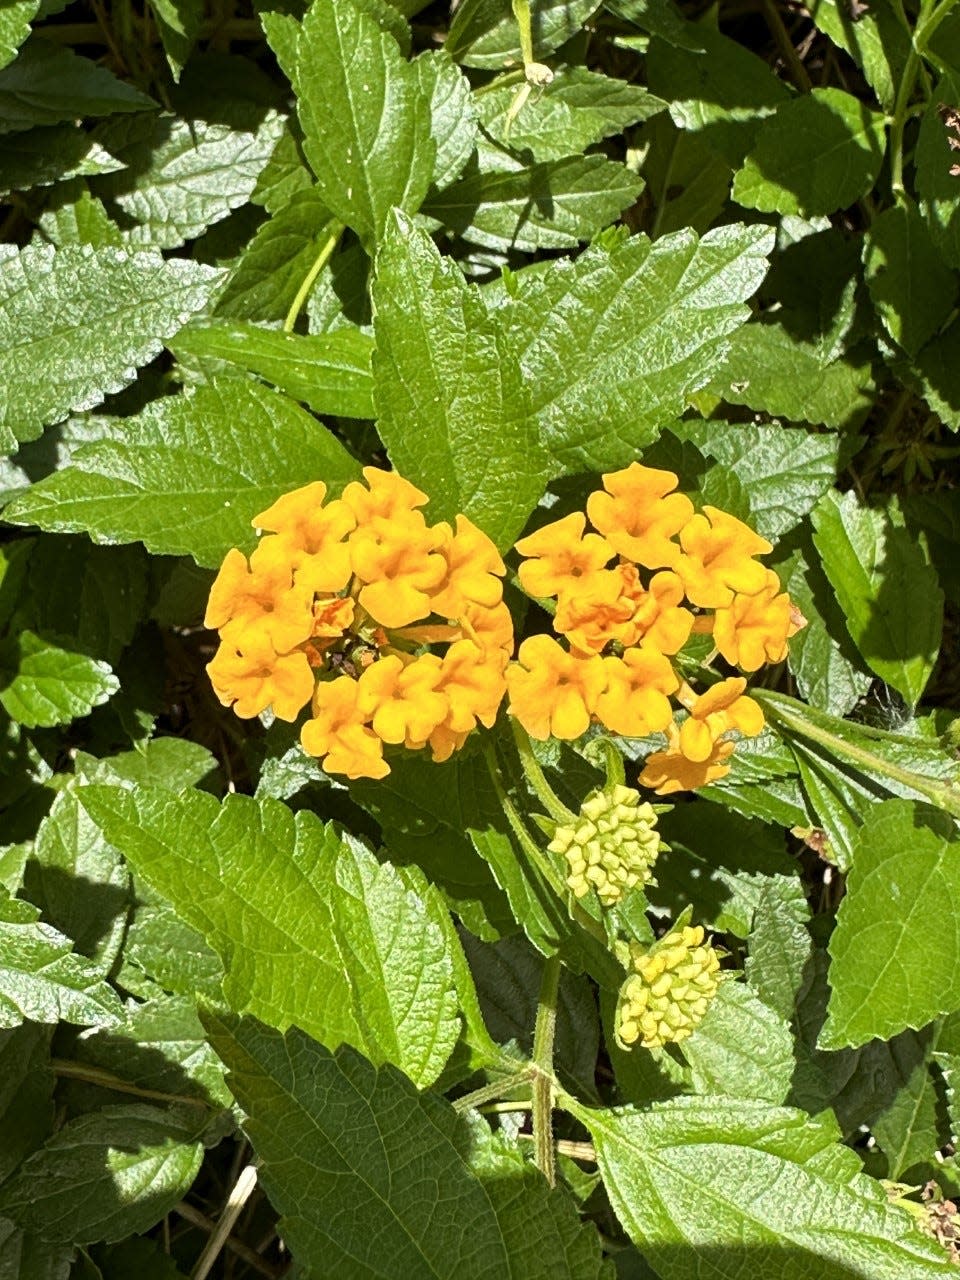 Lantana has yellow flowers and is a low growing, spreading ground cover.